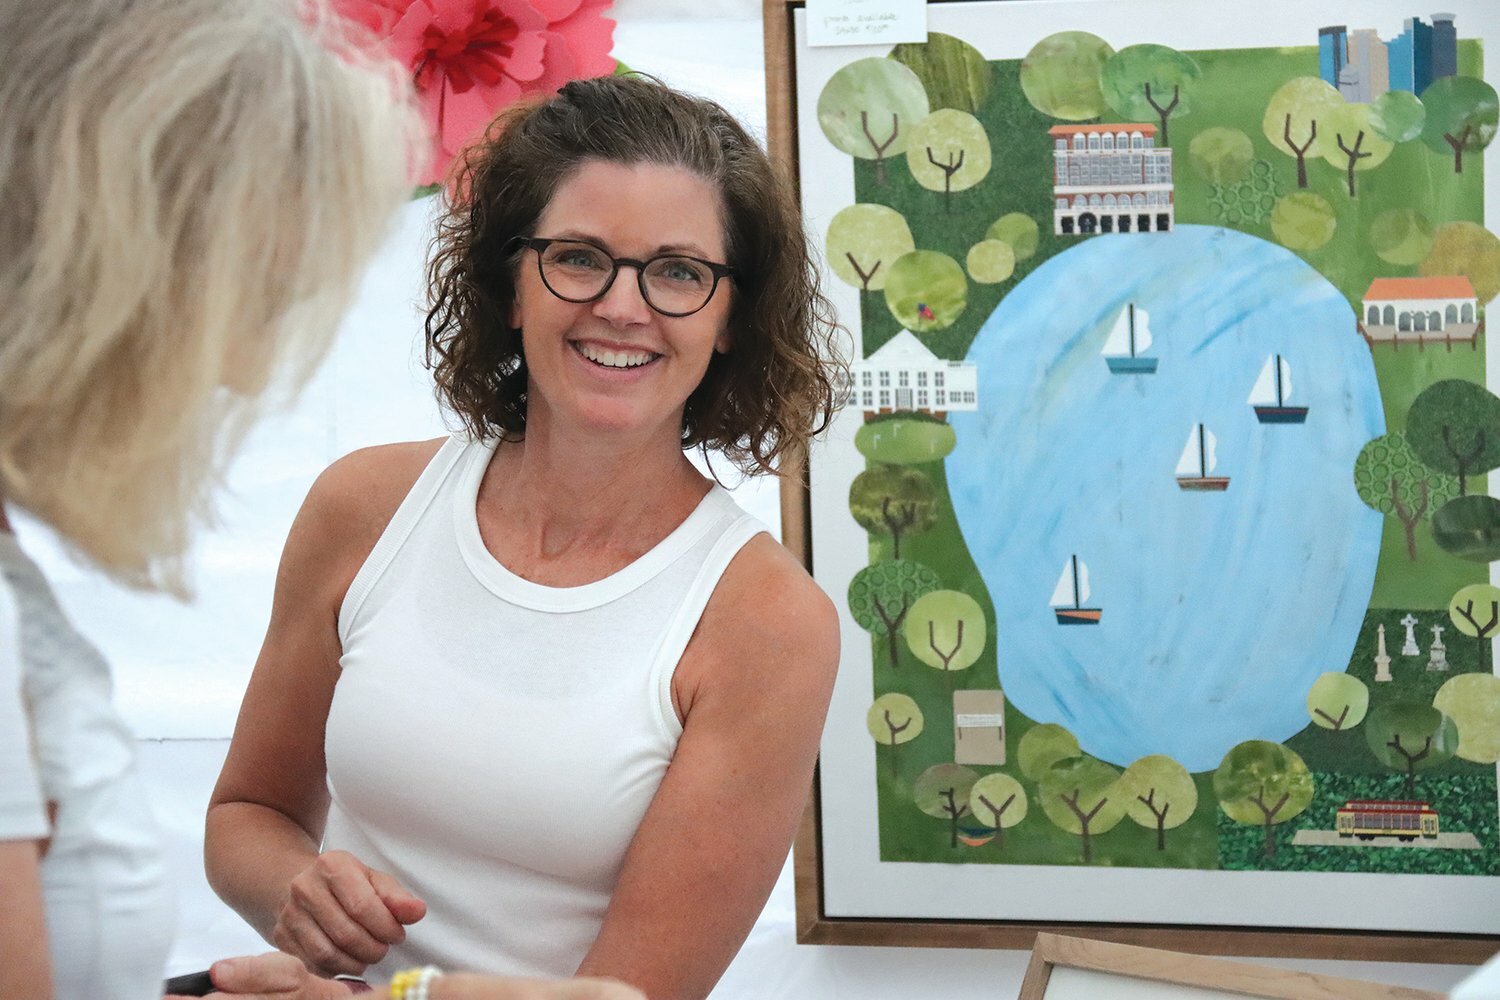 Lynhurst resident Kathy Pope of Yellow Dog Collage sold her handcrafted collages at the 2022 Art on the Edge. “I’m really inspired by color and pattern,” she said.